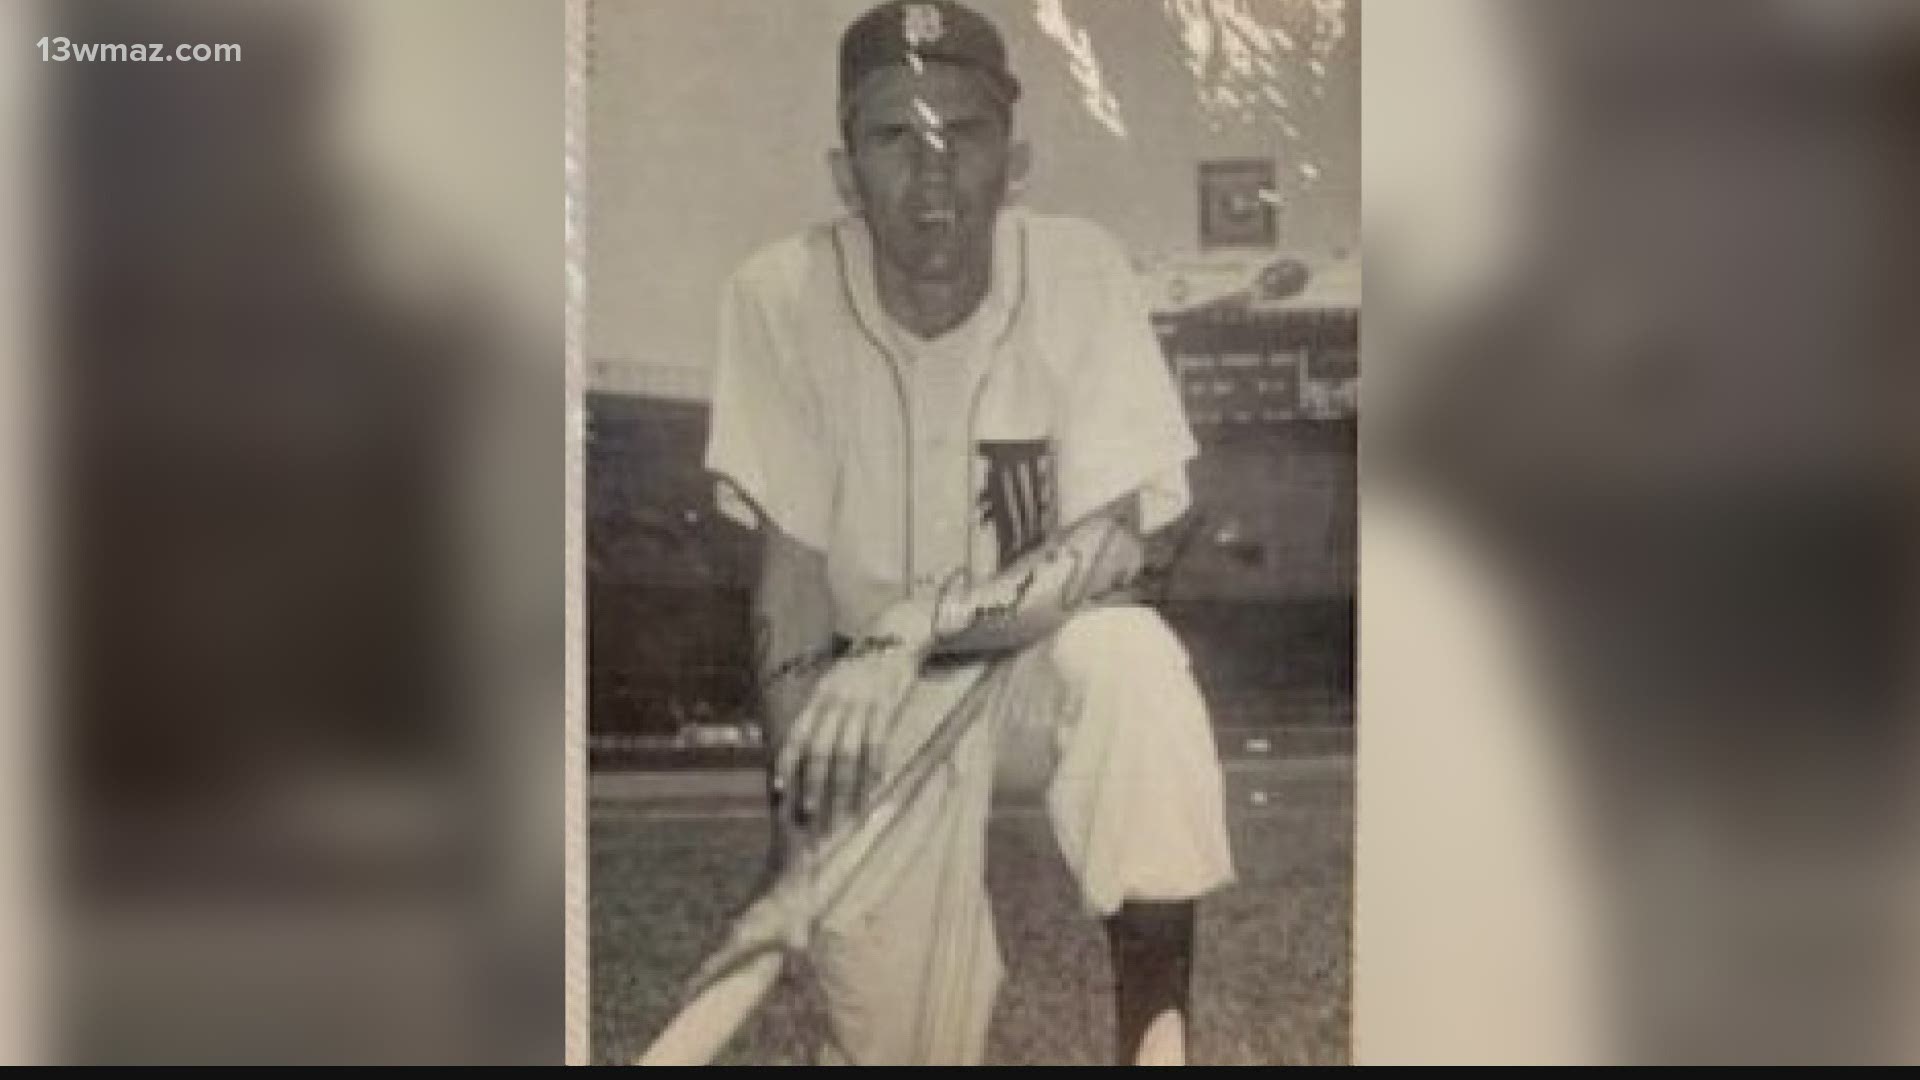 The native of Sandersville was a pioneer, a six-year Major League vet from 1958 to 64. He played most famously for the Washington Senators.